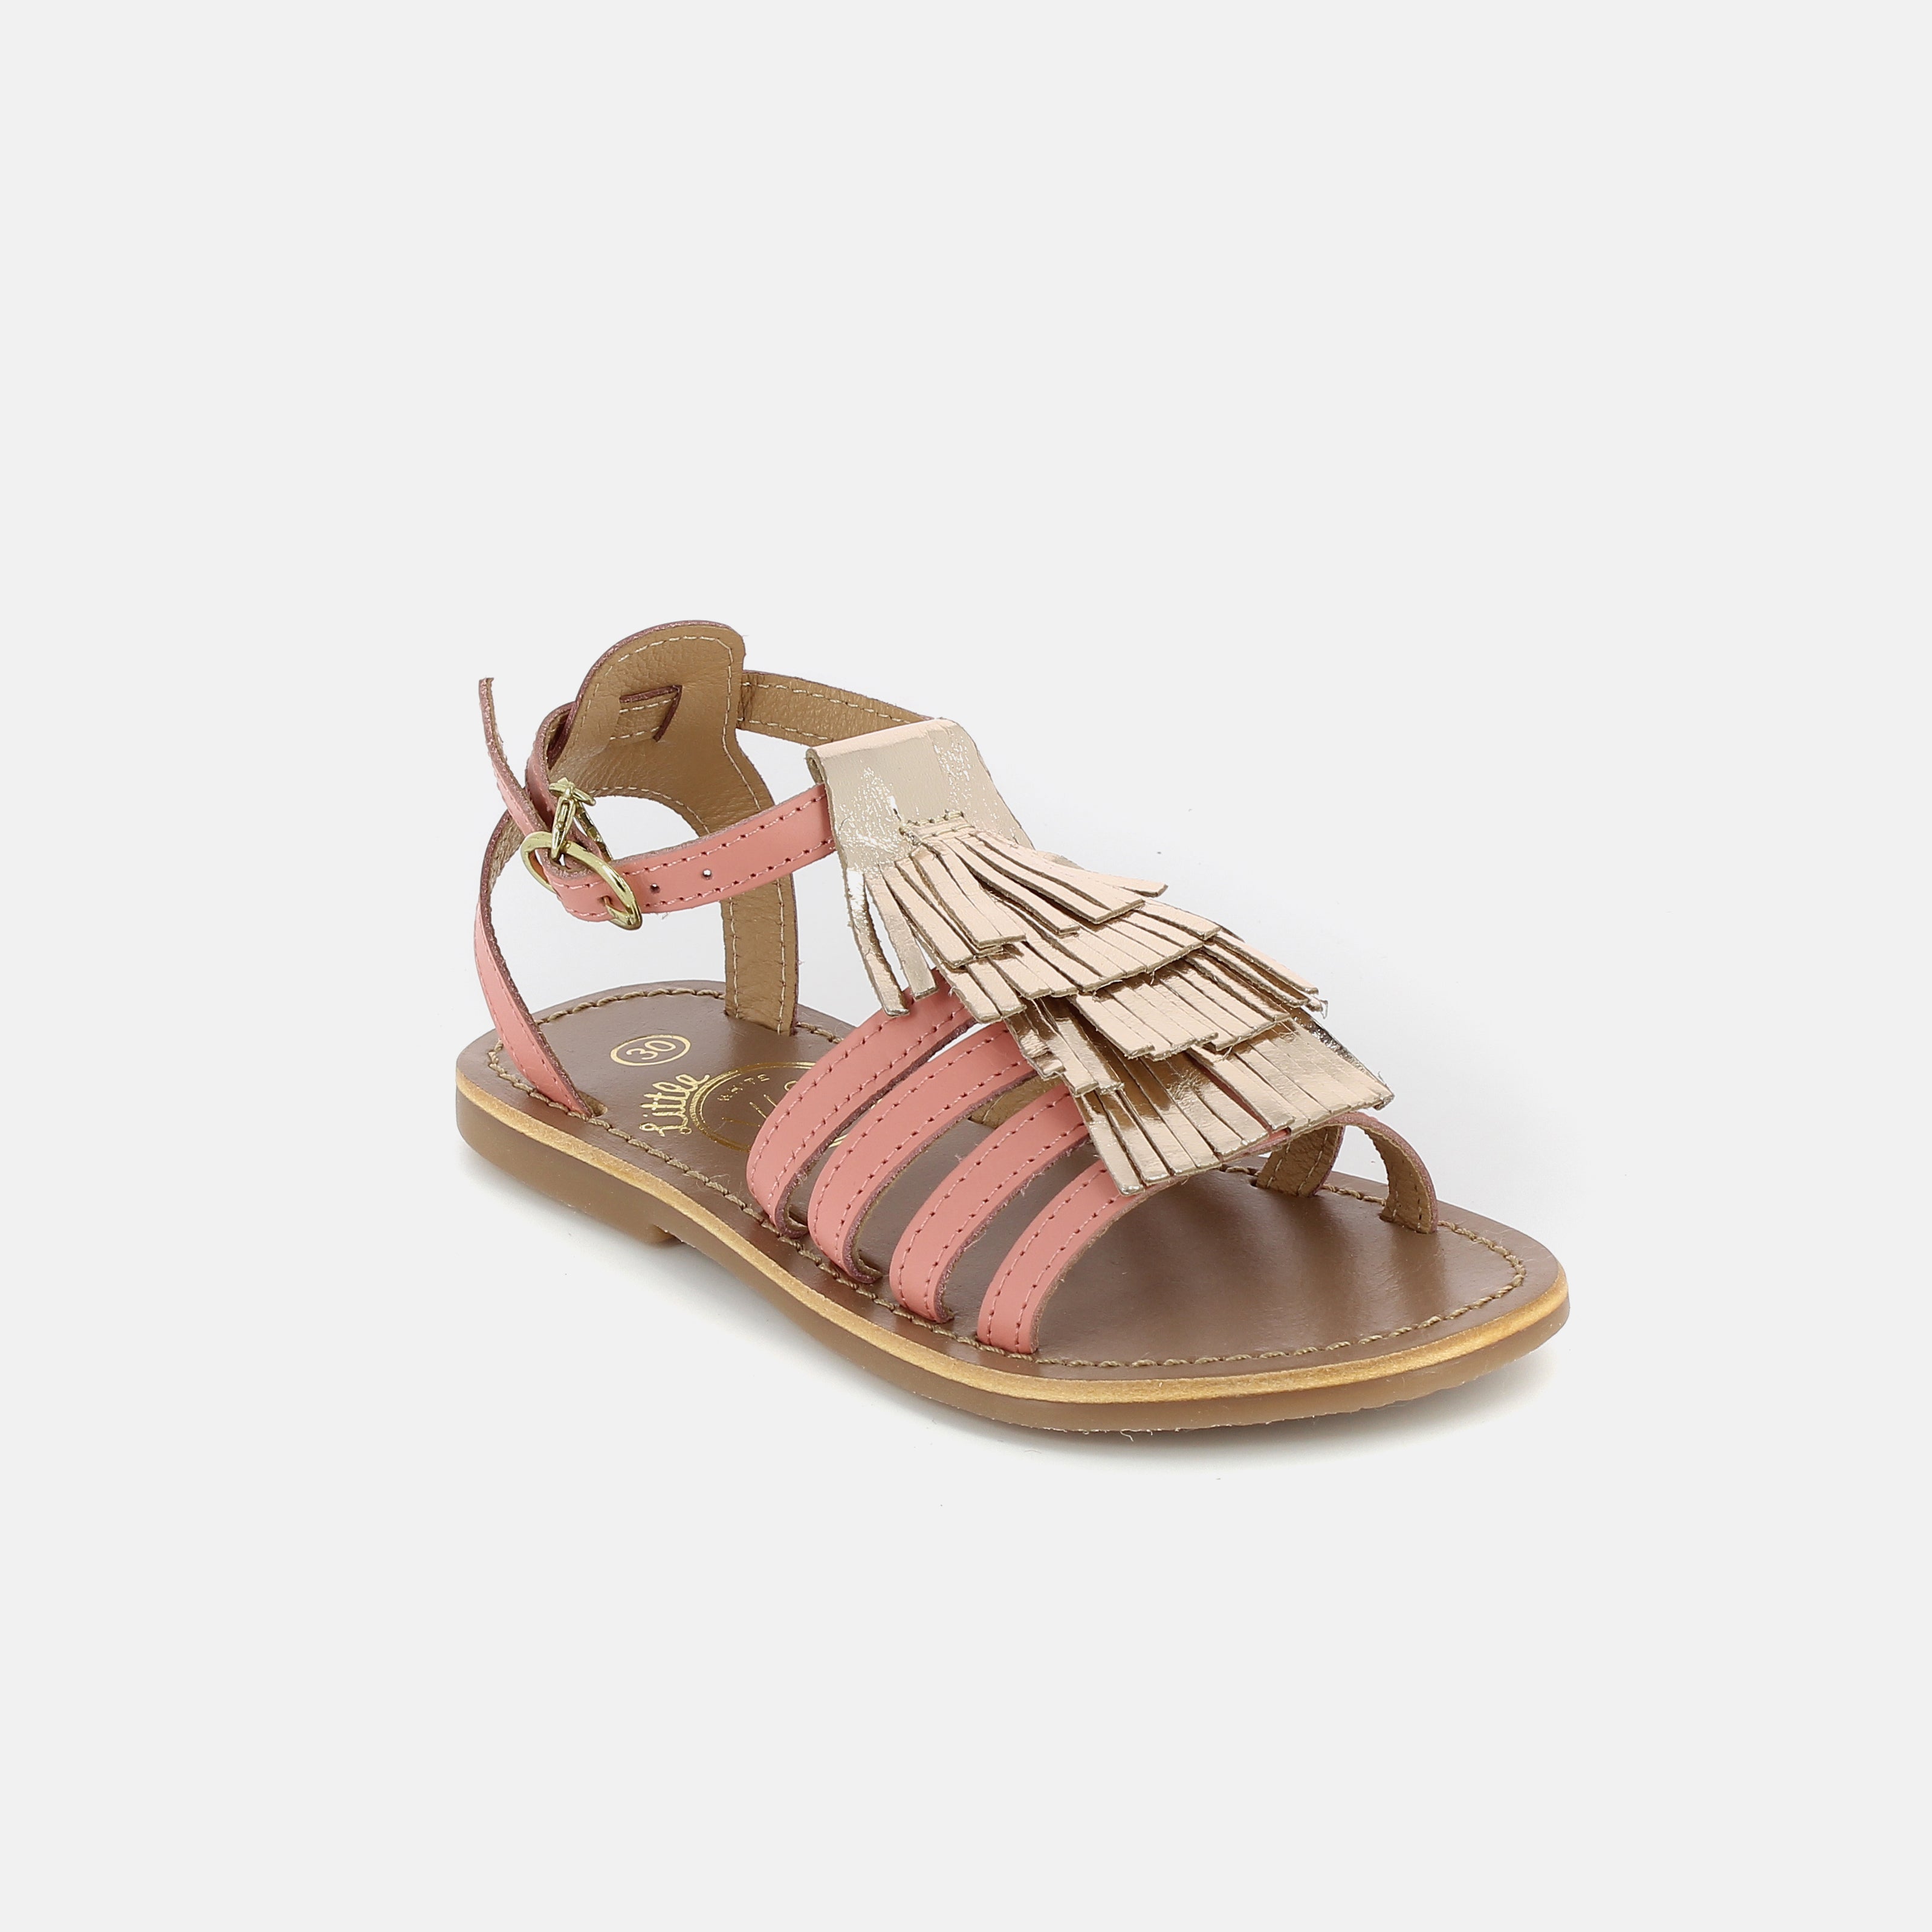 Girls Pink & Gold Leather Sandals